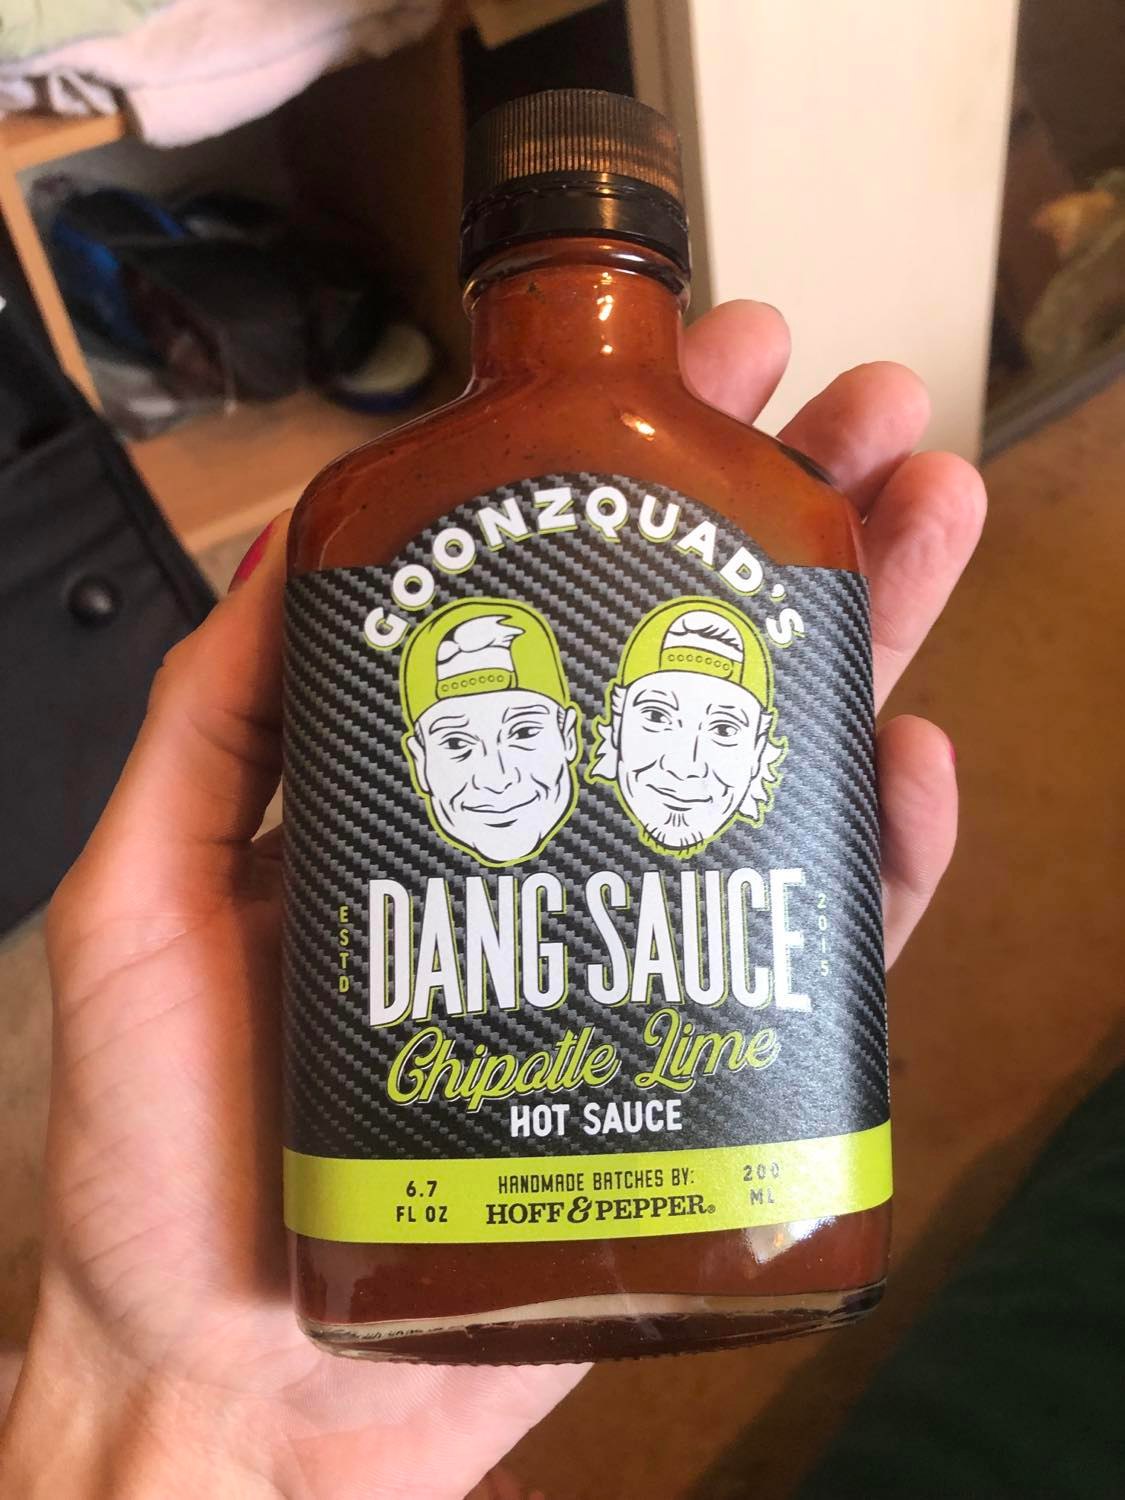 The front of the bottle, carbon-fiber backdrop, with caractures of the two goonzquad boys on top of it, their hats backwards. It's simple white with black linework, and the hats and outline are lime green. It boldly states DANG SAUCE, with Goonzquad's up at the top. Chipotle lime appear in script beneath dang sauce, and it is handmade batches by Hoff and Pepper. Six point seven fluid ounces.